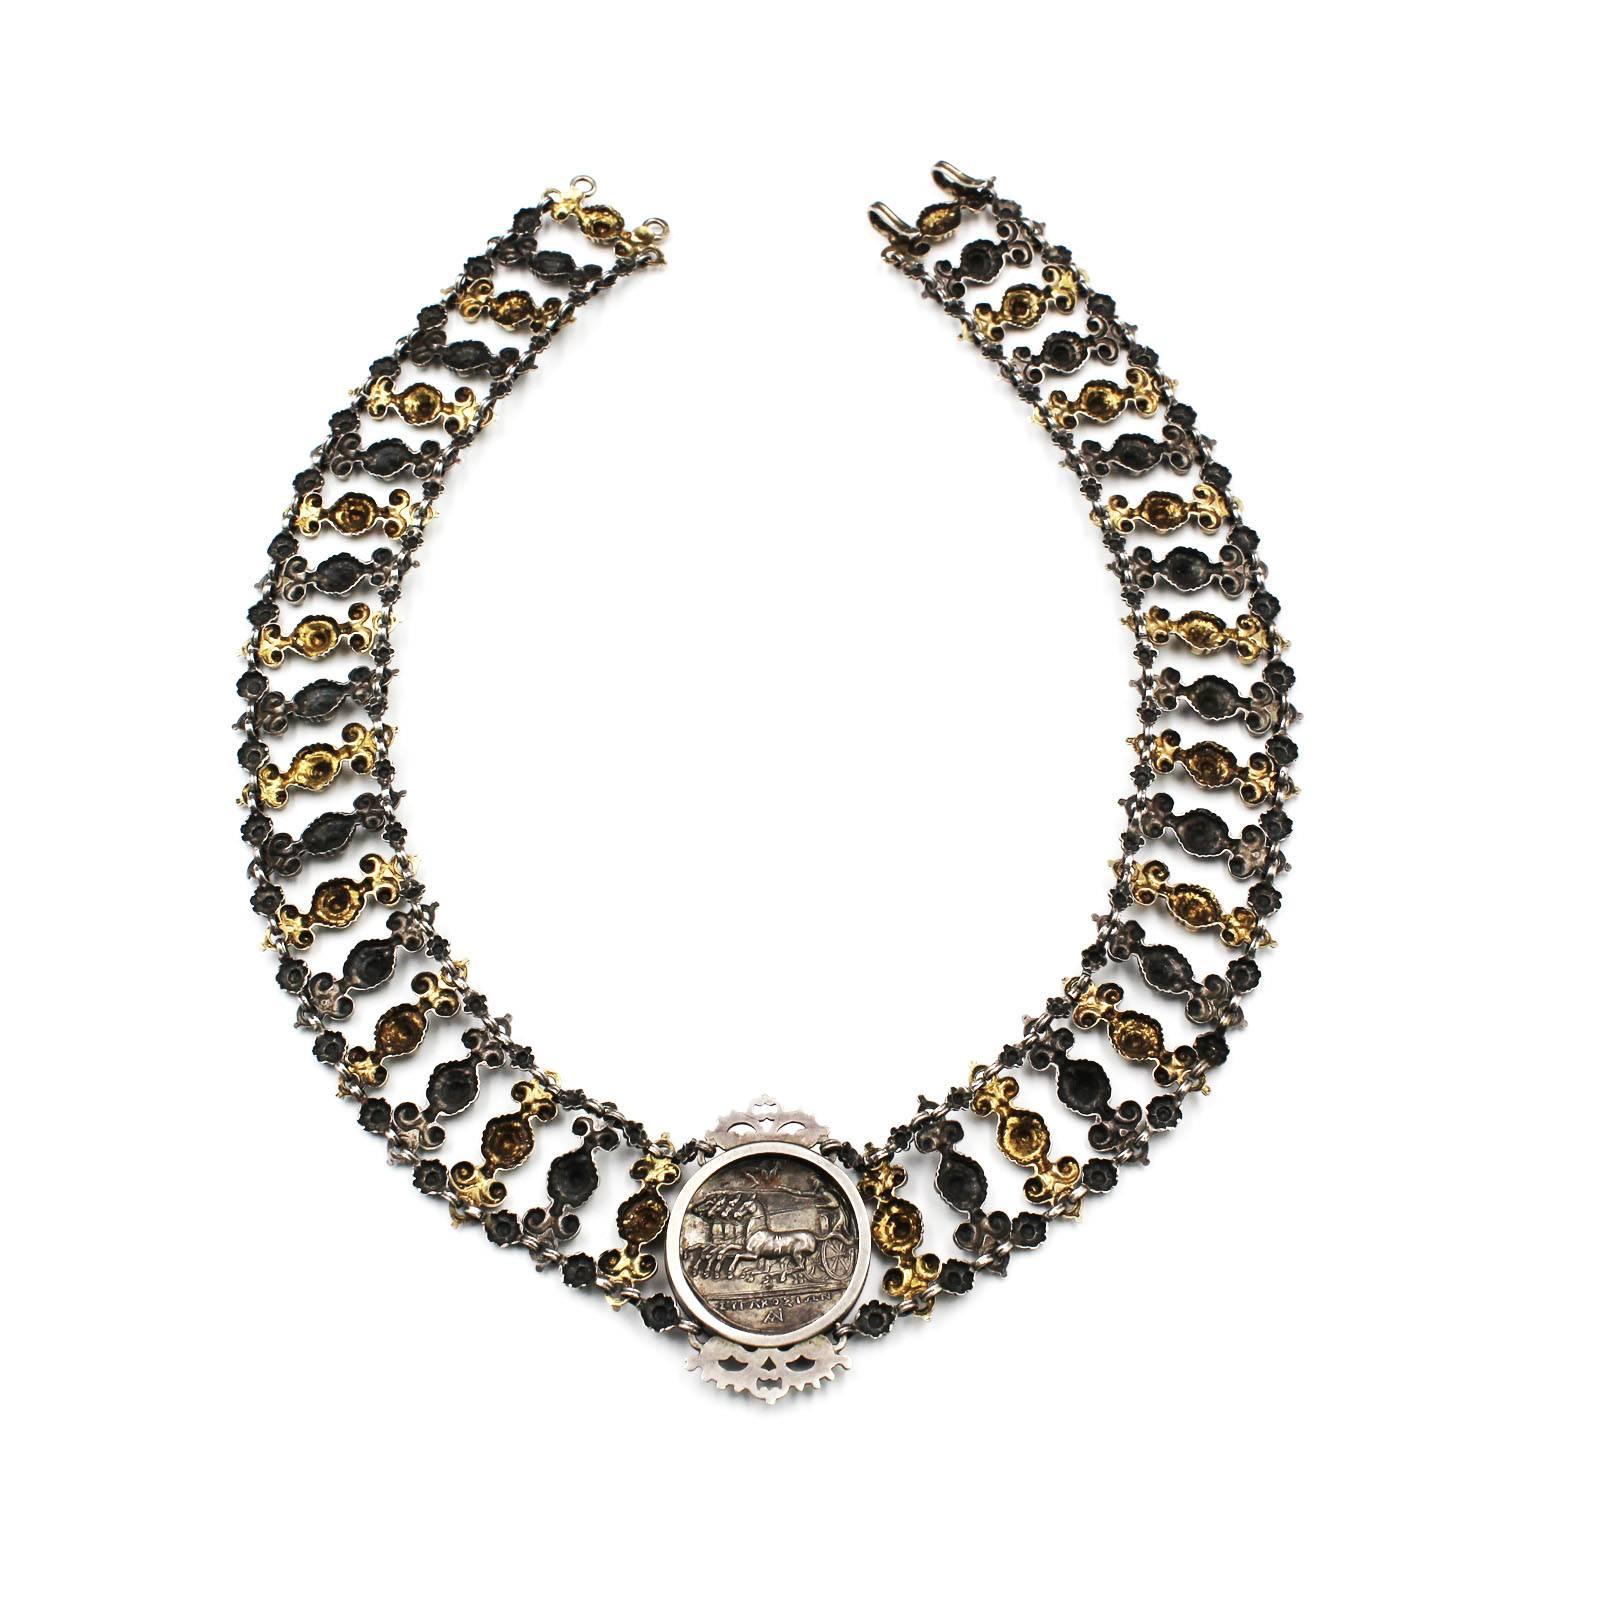 An Austro-Hungarian 19th century silver collar necklace by Georg Adam Scheid, formed from a line of silver and silver gilt foliate scroll links joined by a floral border to each end. The front section mounted with an ancient silver tetradrachma coin